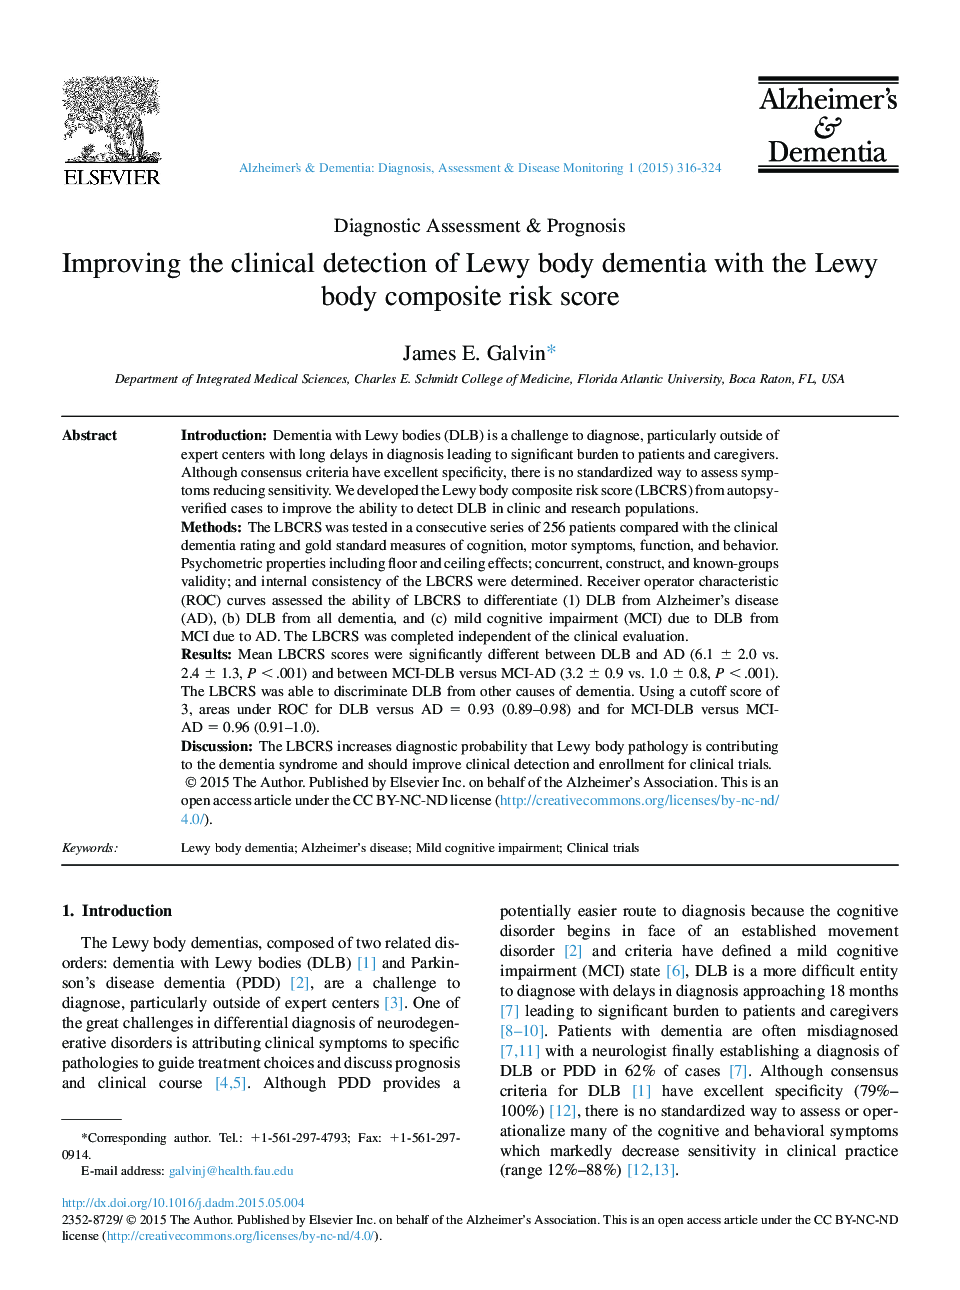 Improving the clinical detection of Lewy body dementia with the Lewy body composite risk score